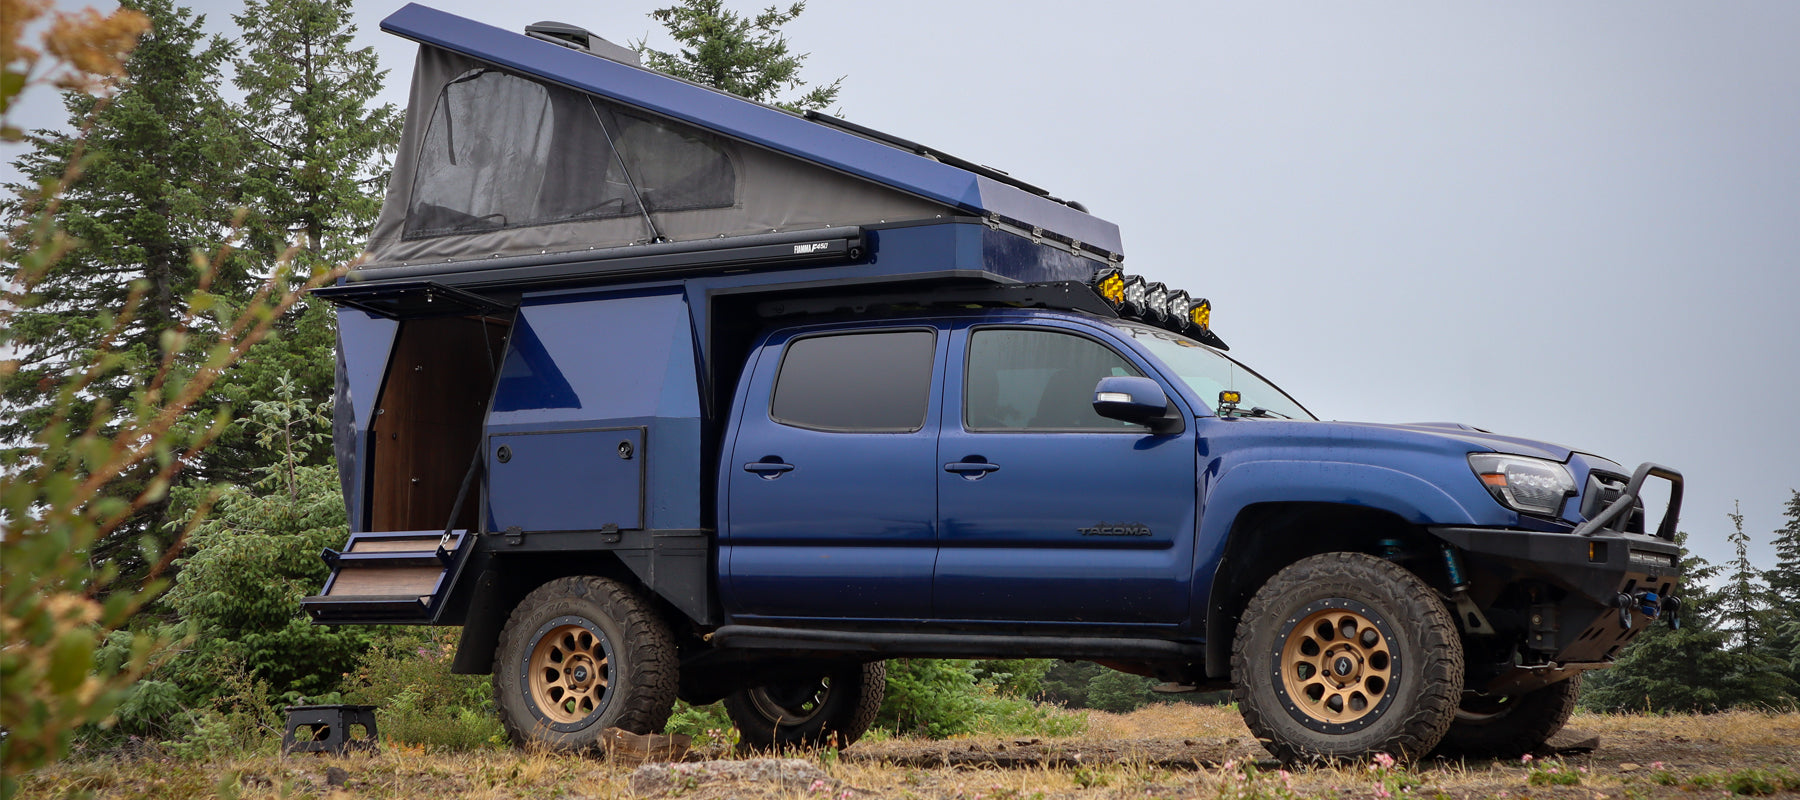 Rigs We Dig: Badass Custom Toyota Tacoma Camper with HEST Dually Long